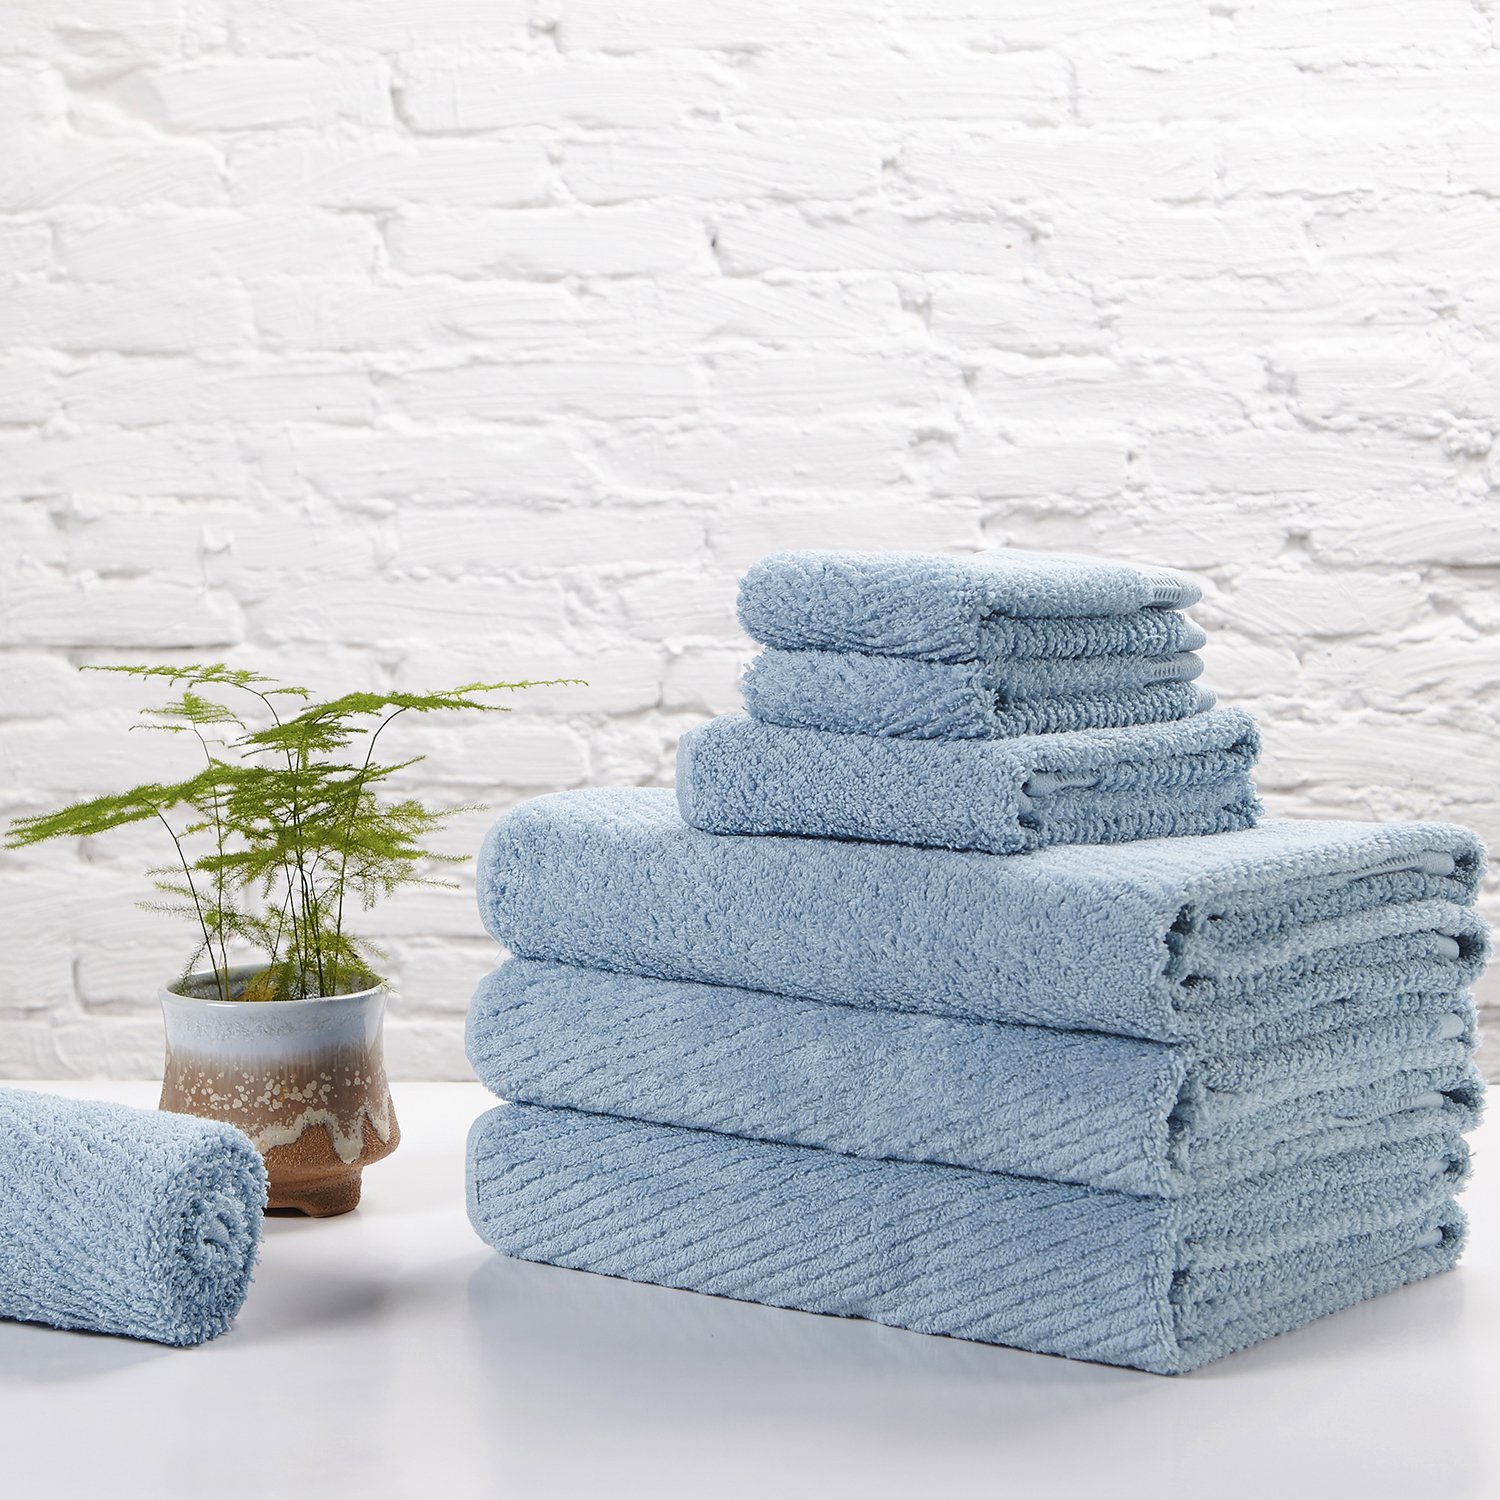 10 Best Cheap Towels for Your Bathroom Compare, Buy & Save (2019